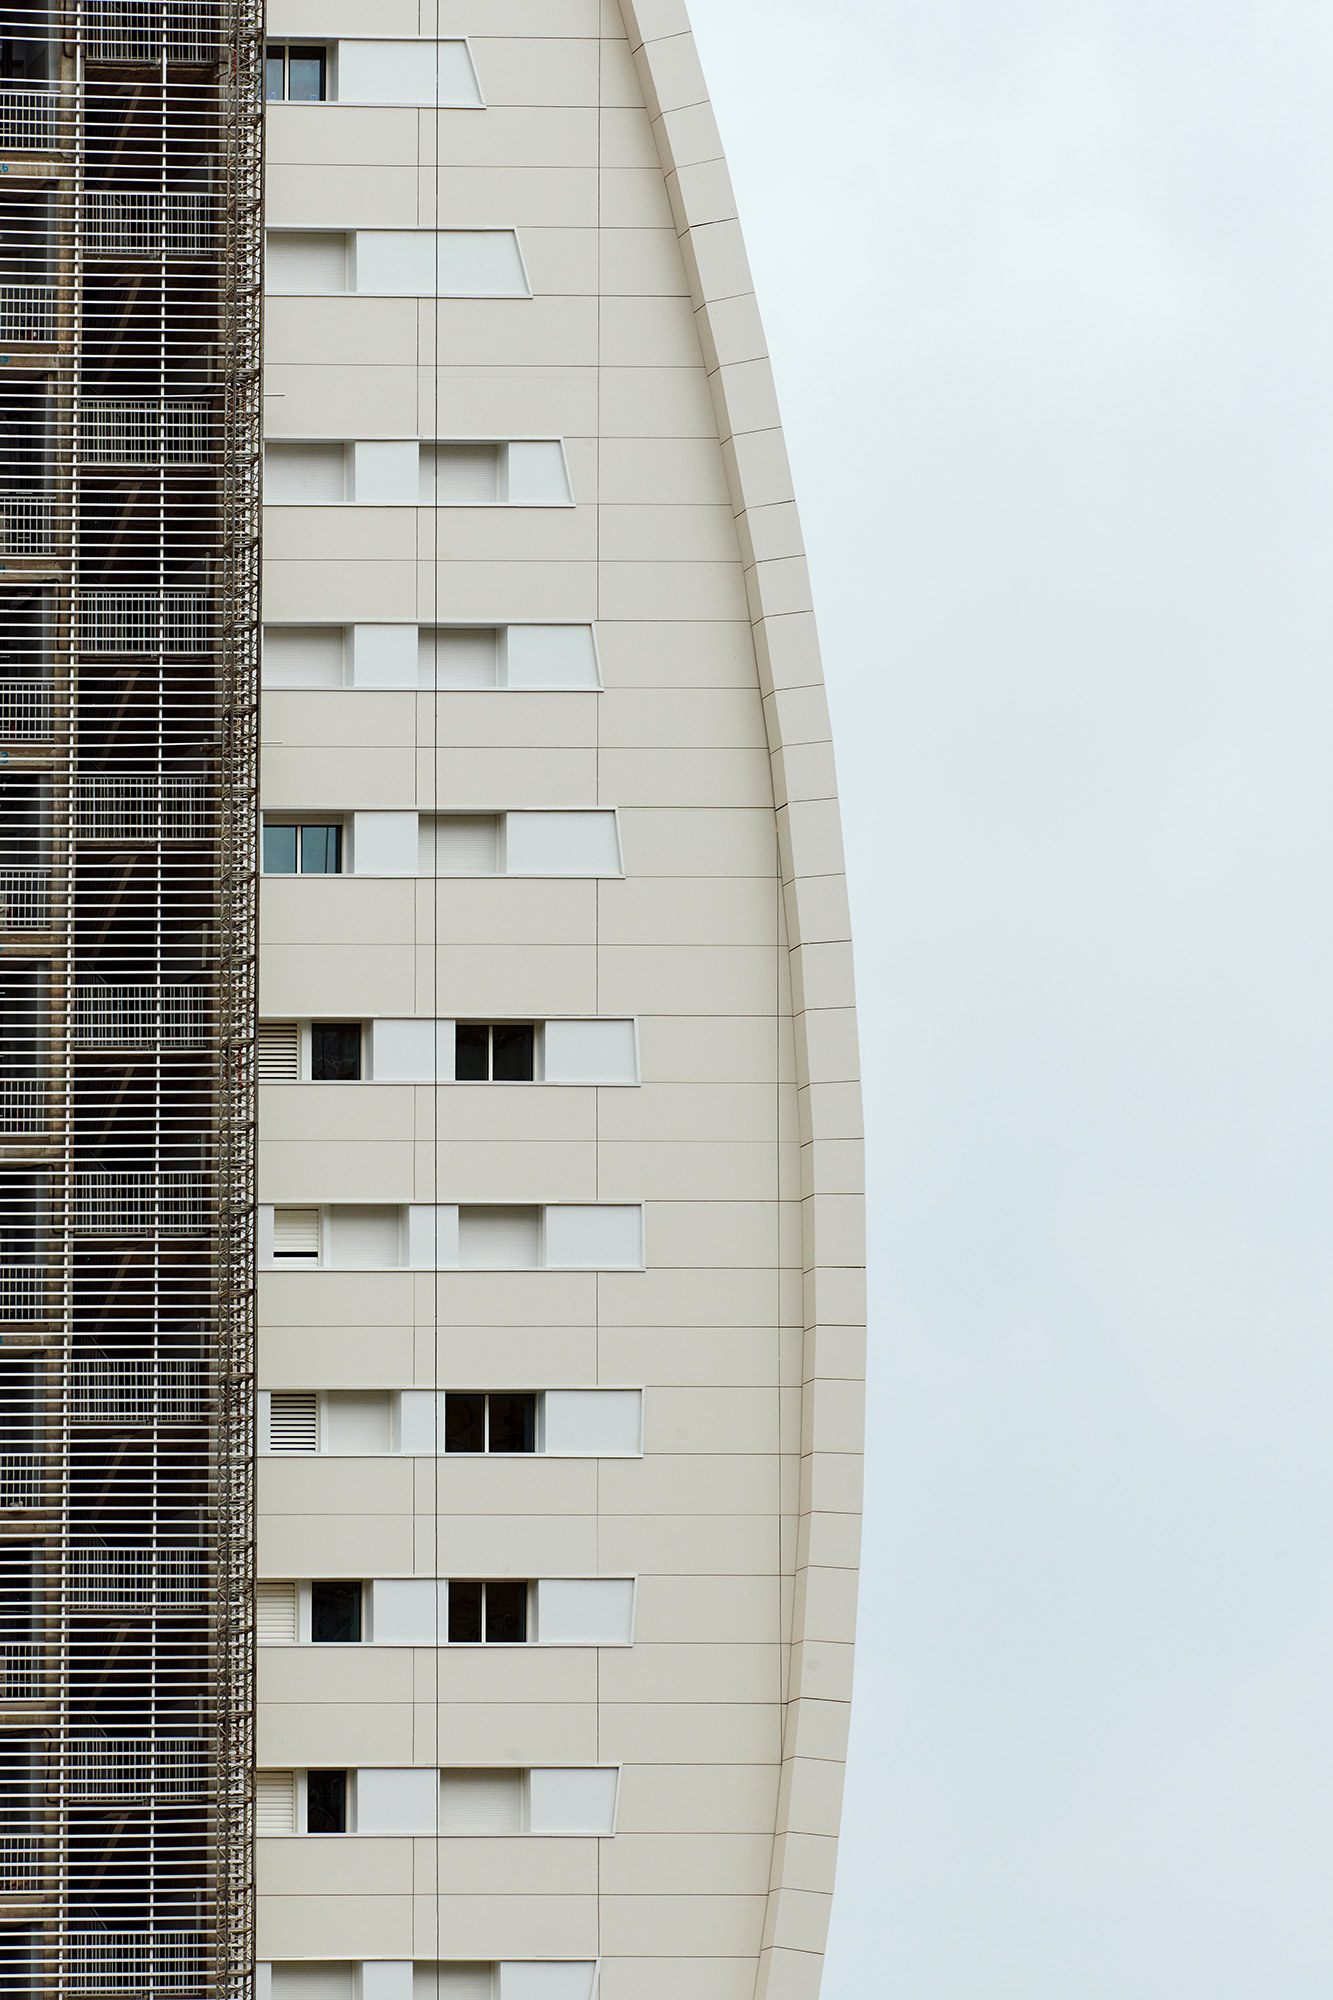 Image of delfin tower benidorm 7 in Dekton presents the world’s first curved and ventilated façade made of ultra-compact stone - Cosentino